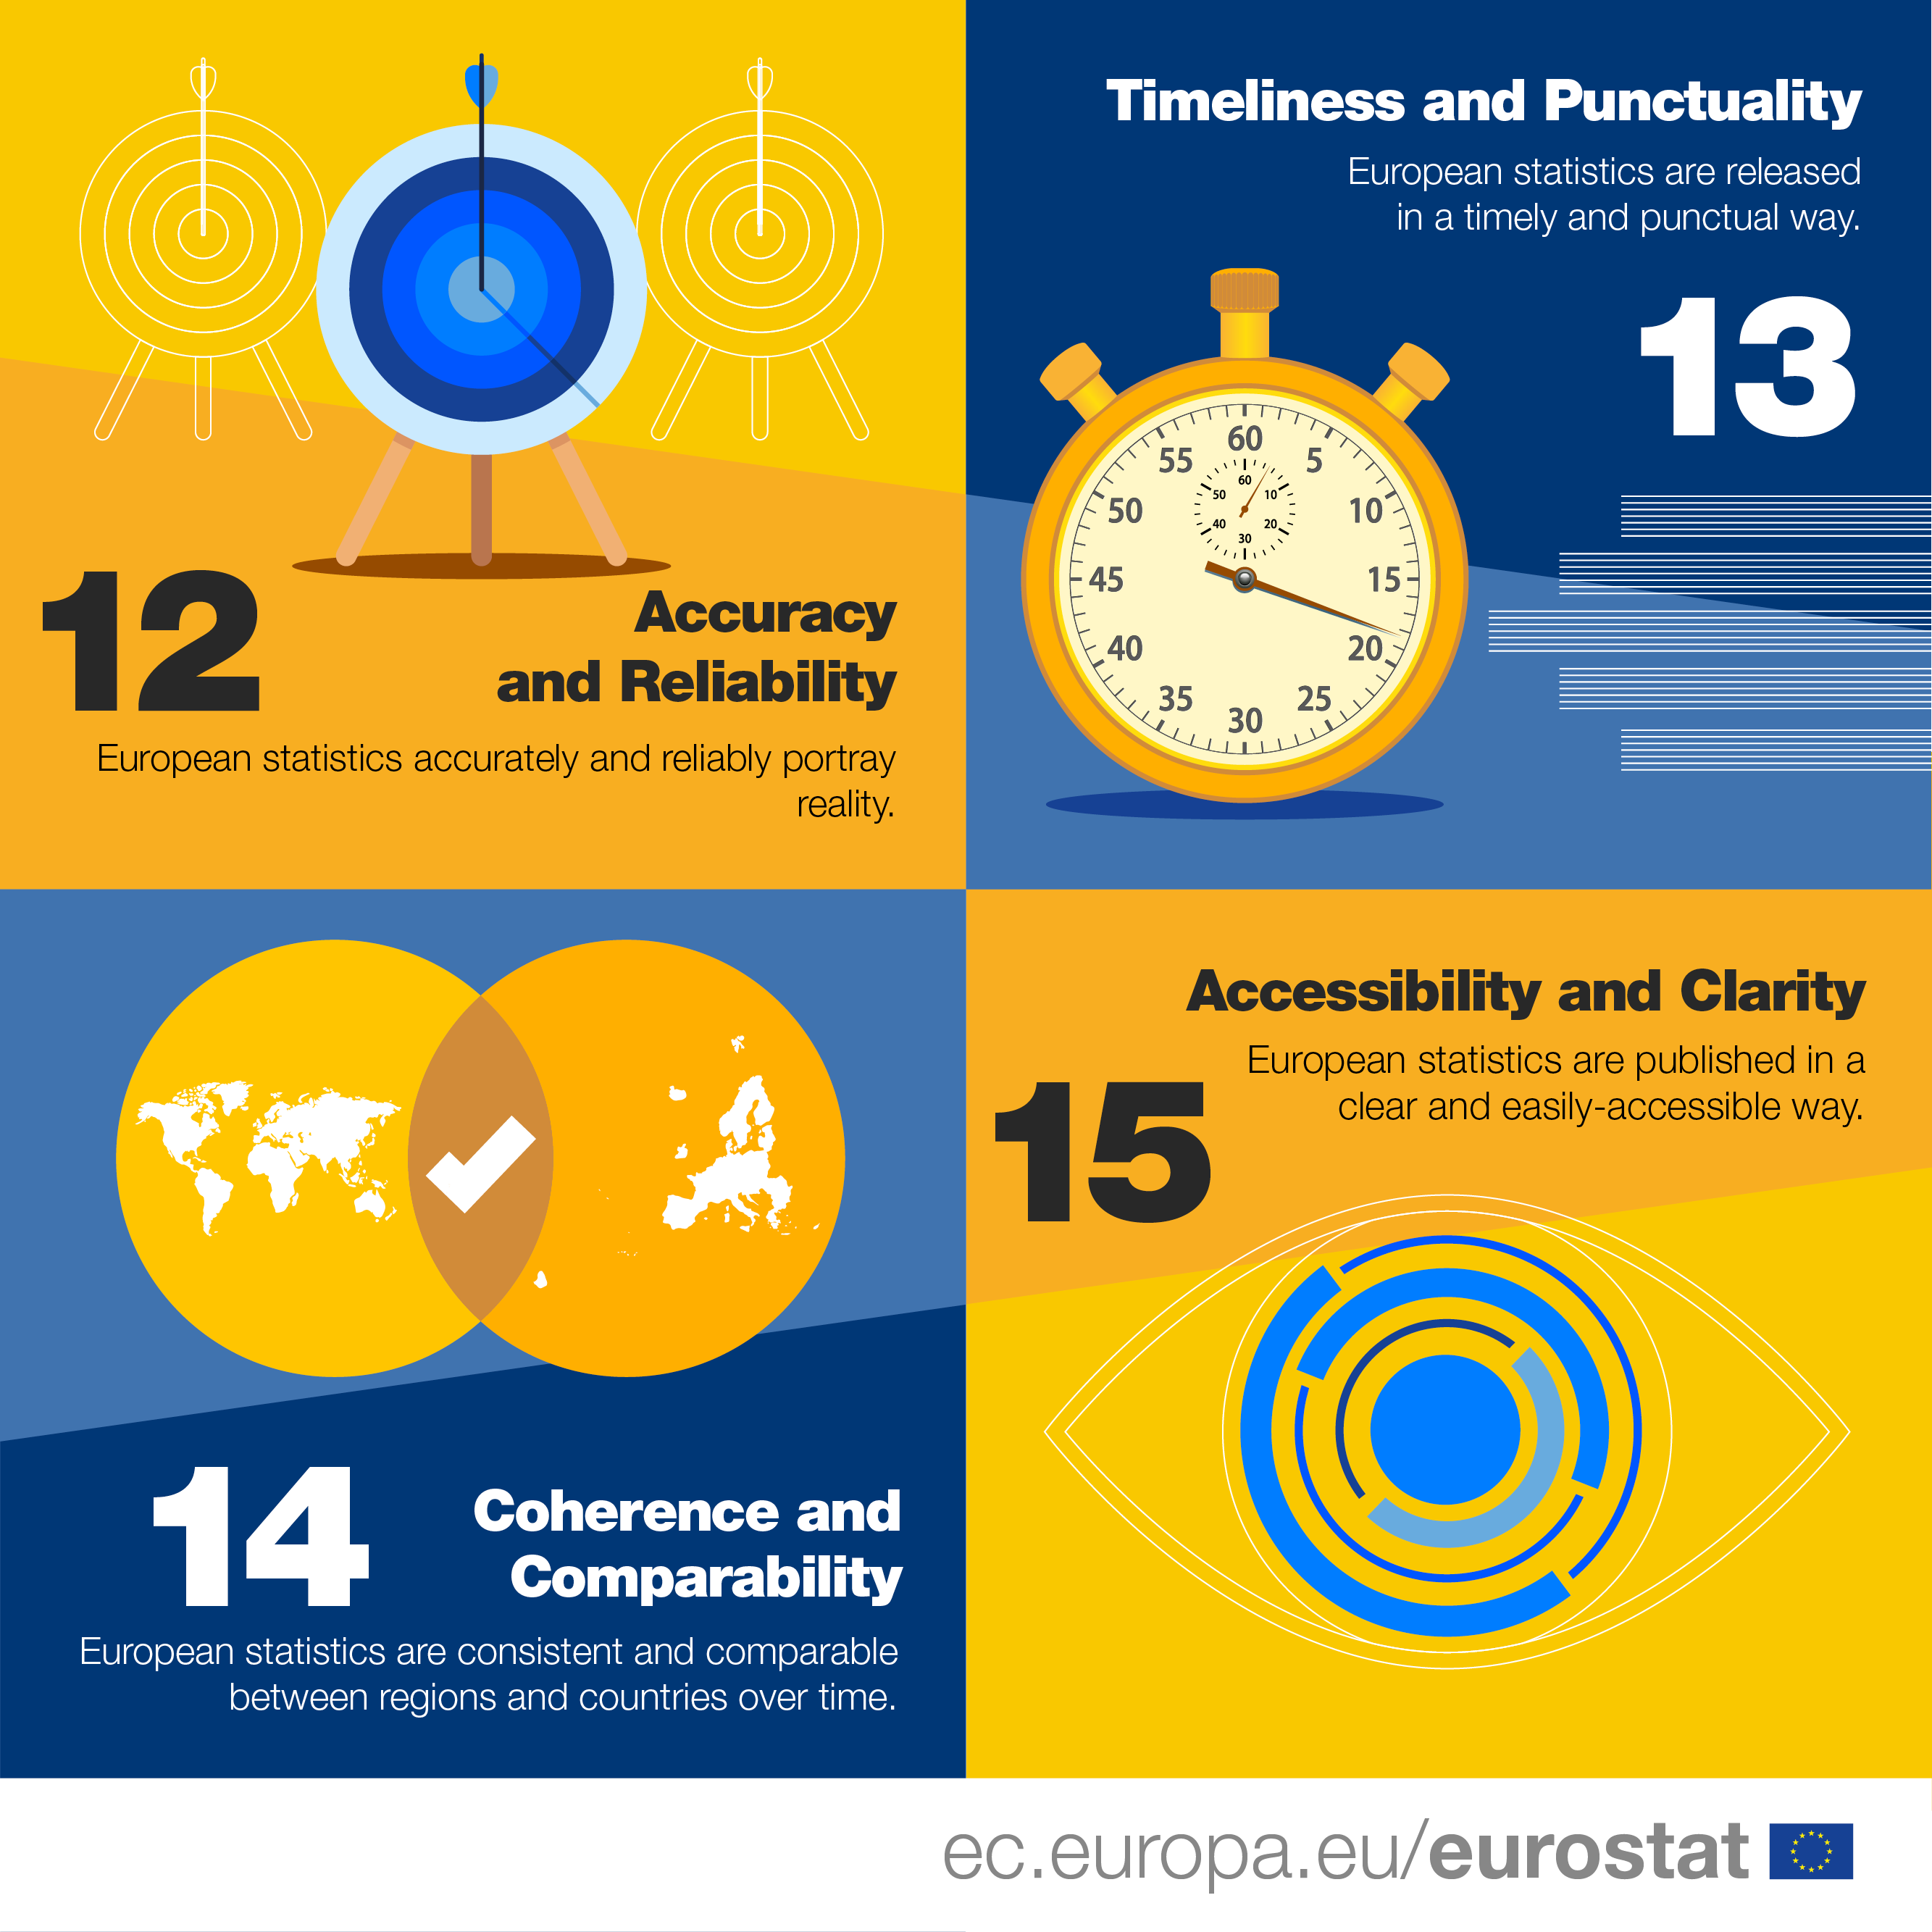 Infographic Code of Practice: 12 Accuracy and Reliability European statistics accurately and reliably portray reality. 13 Timeliness and Punctuality European statistics are released in a timely and punctual way. 14 Coherence and Comparability European statistics are consistent and comparable between regions and countries over time. 15 Accessibility and Clarity European statistics are published in a clear and easily-accessible way.